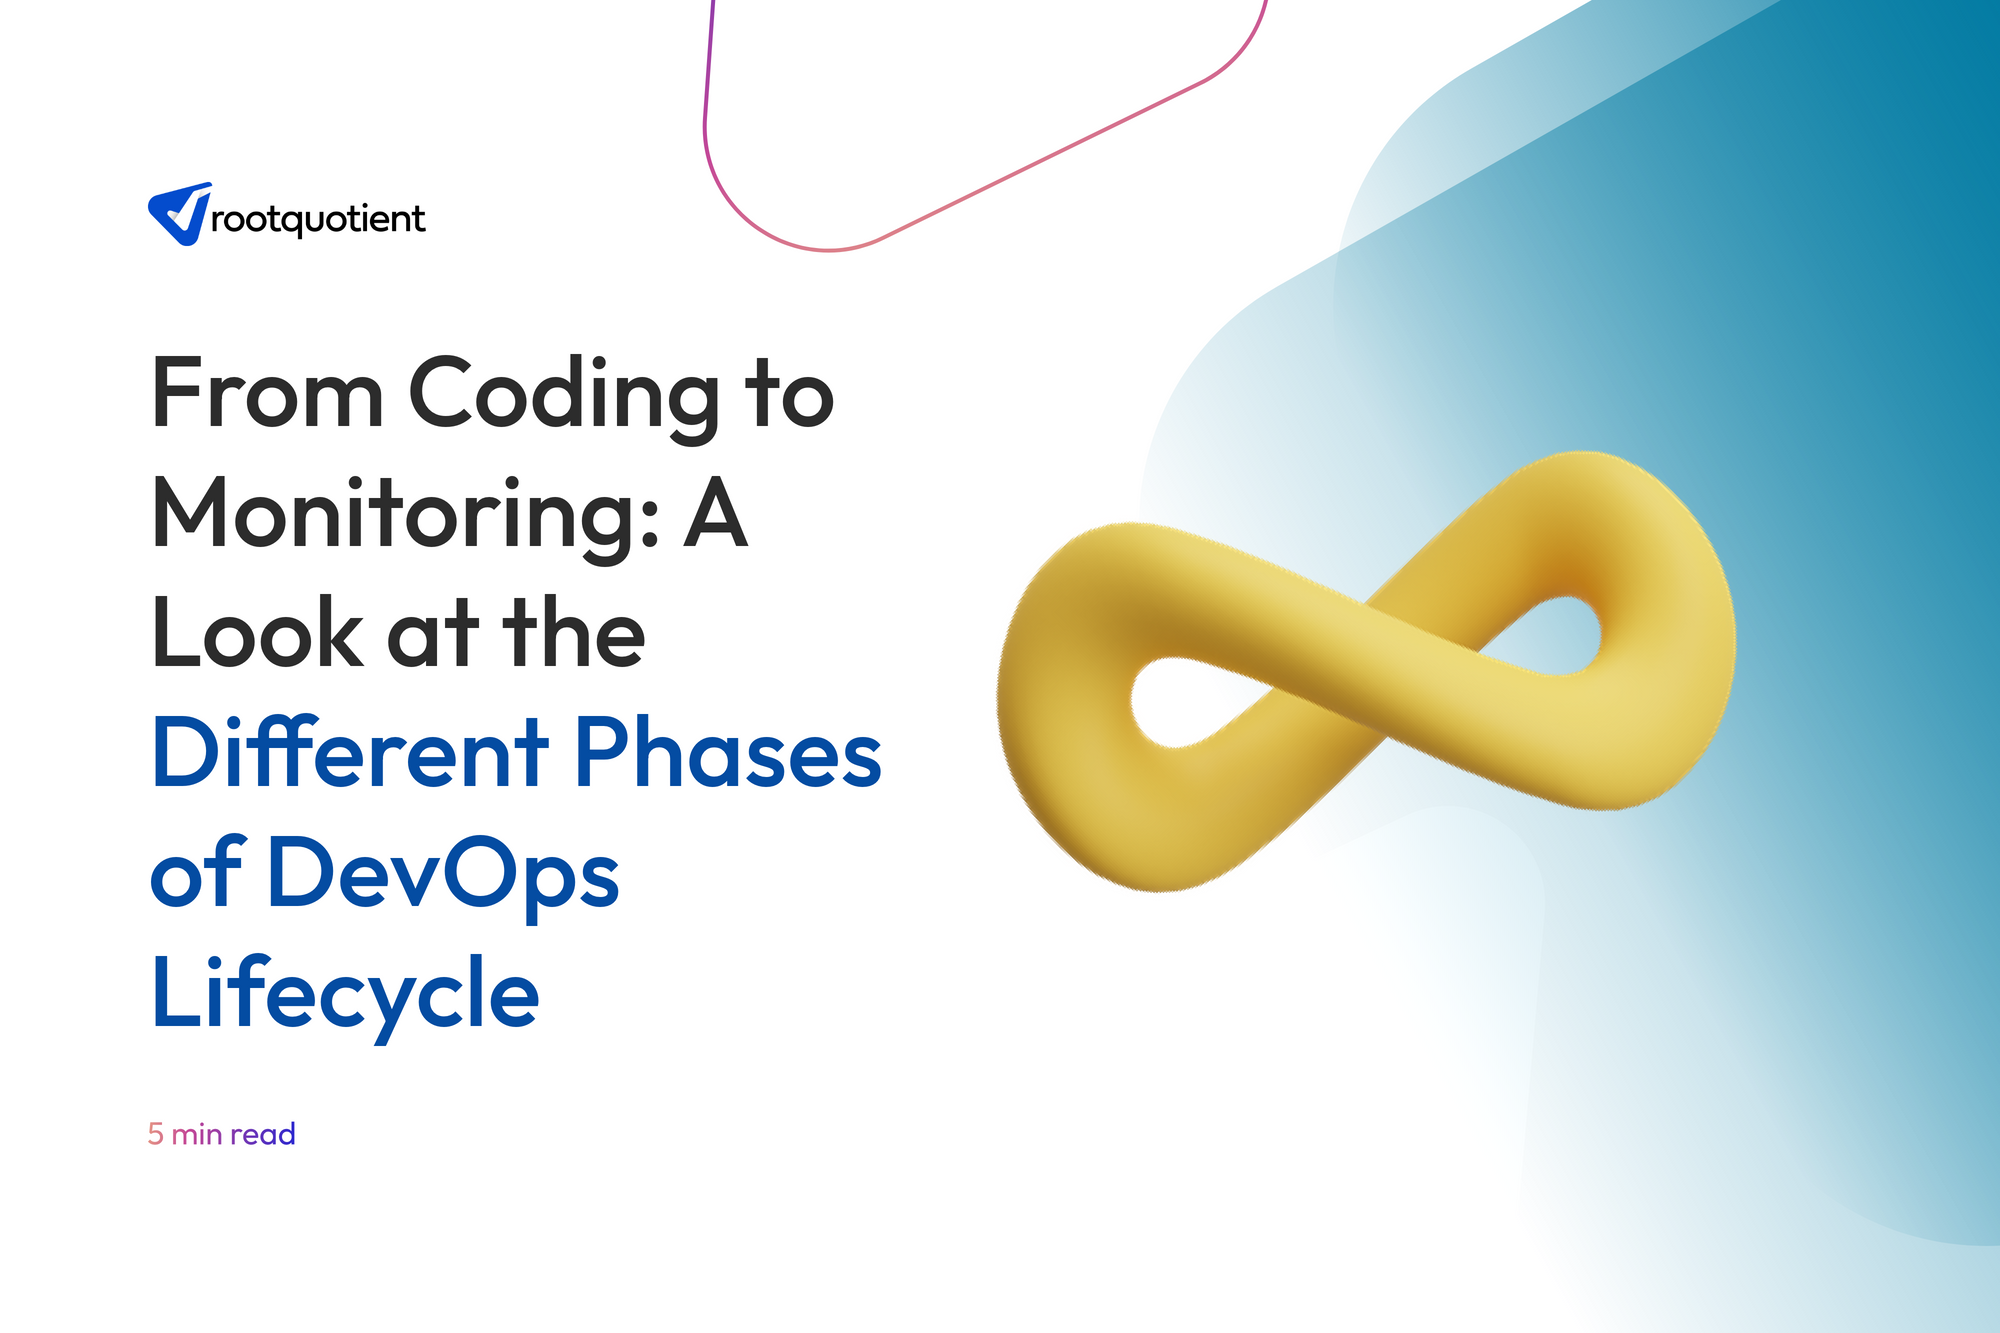 From Coding to Monitoring: A Look at the Different Phases of DevOps Lifecycle